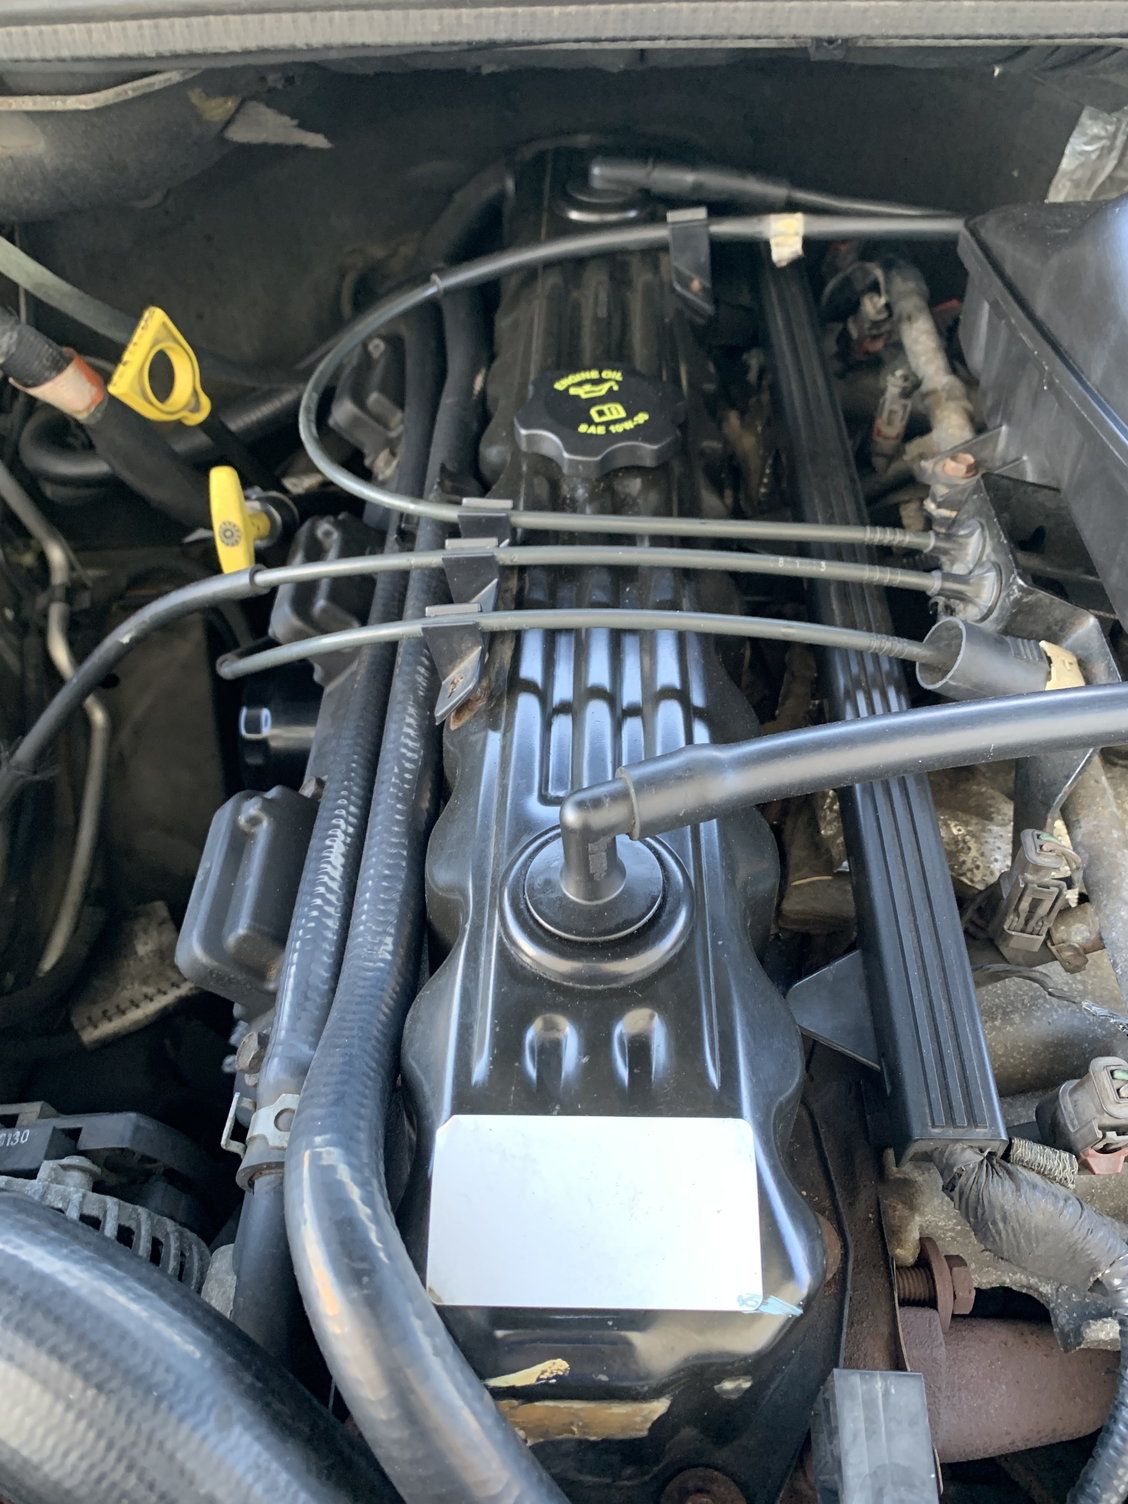 Help! Out of ideas on P0300, P0301, etc. codes & misfire... - Jeep Cherokee  Forum